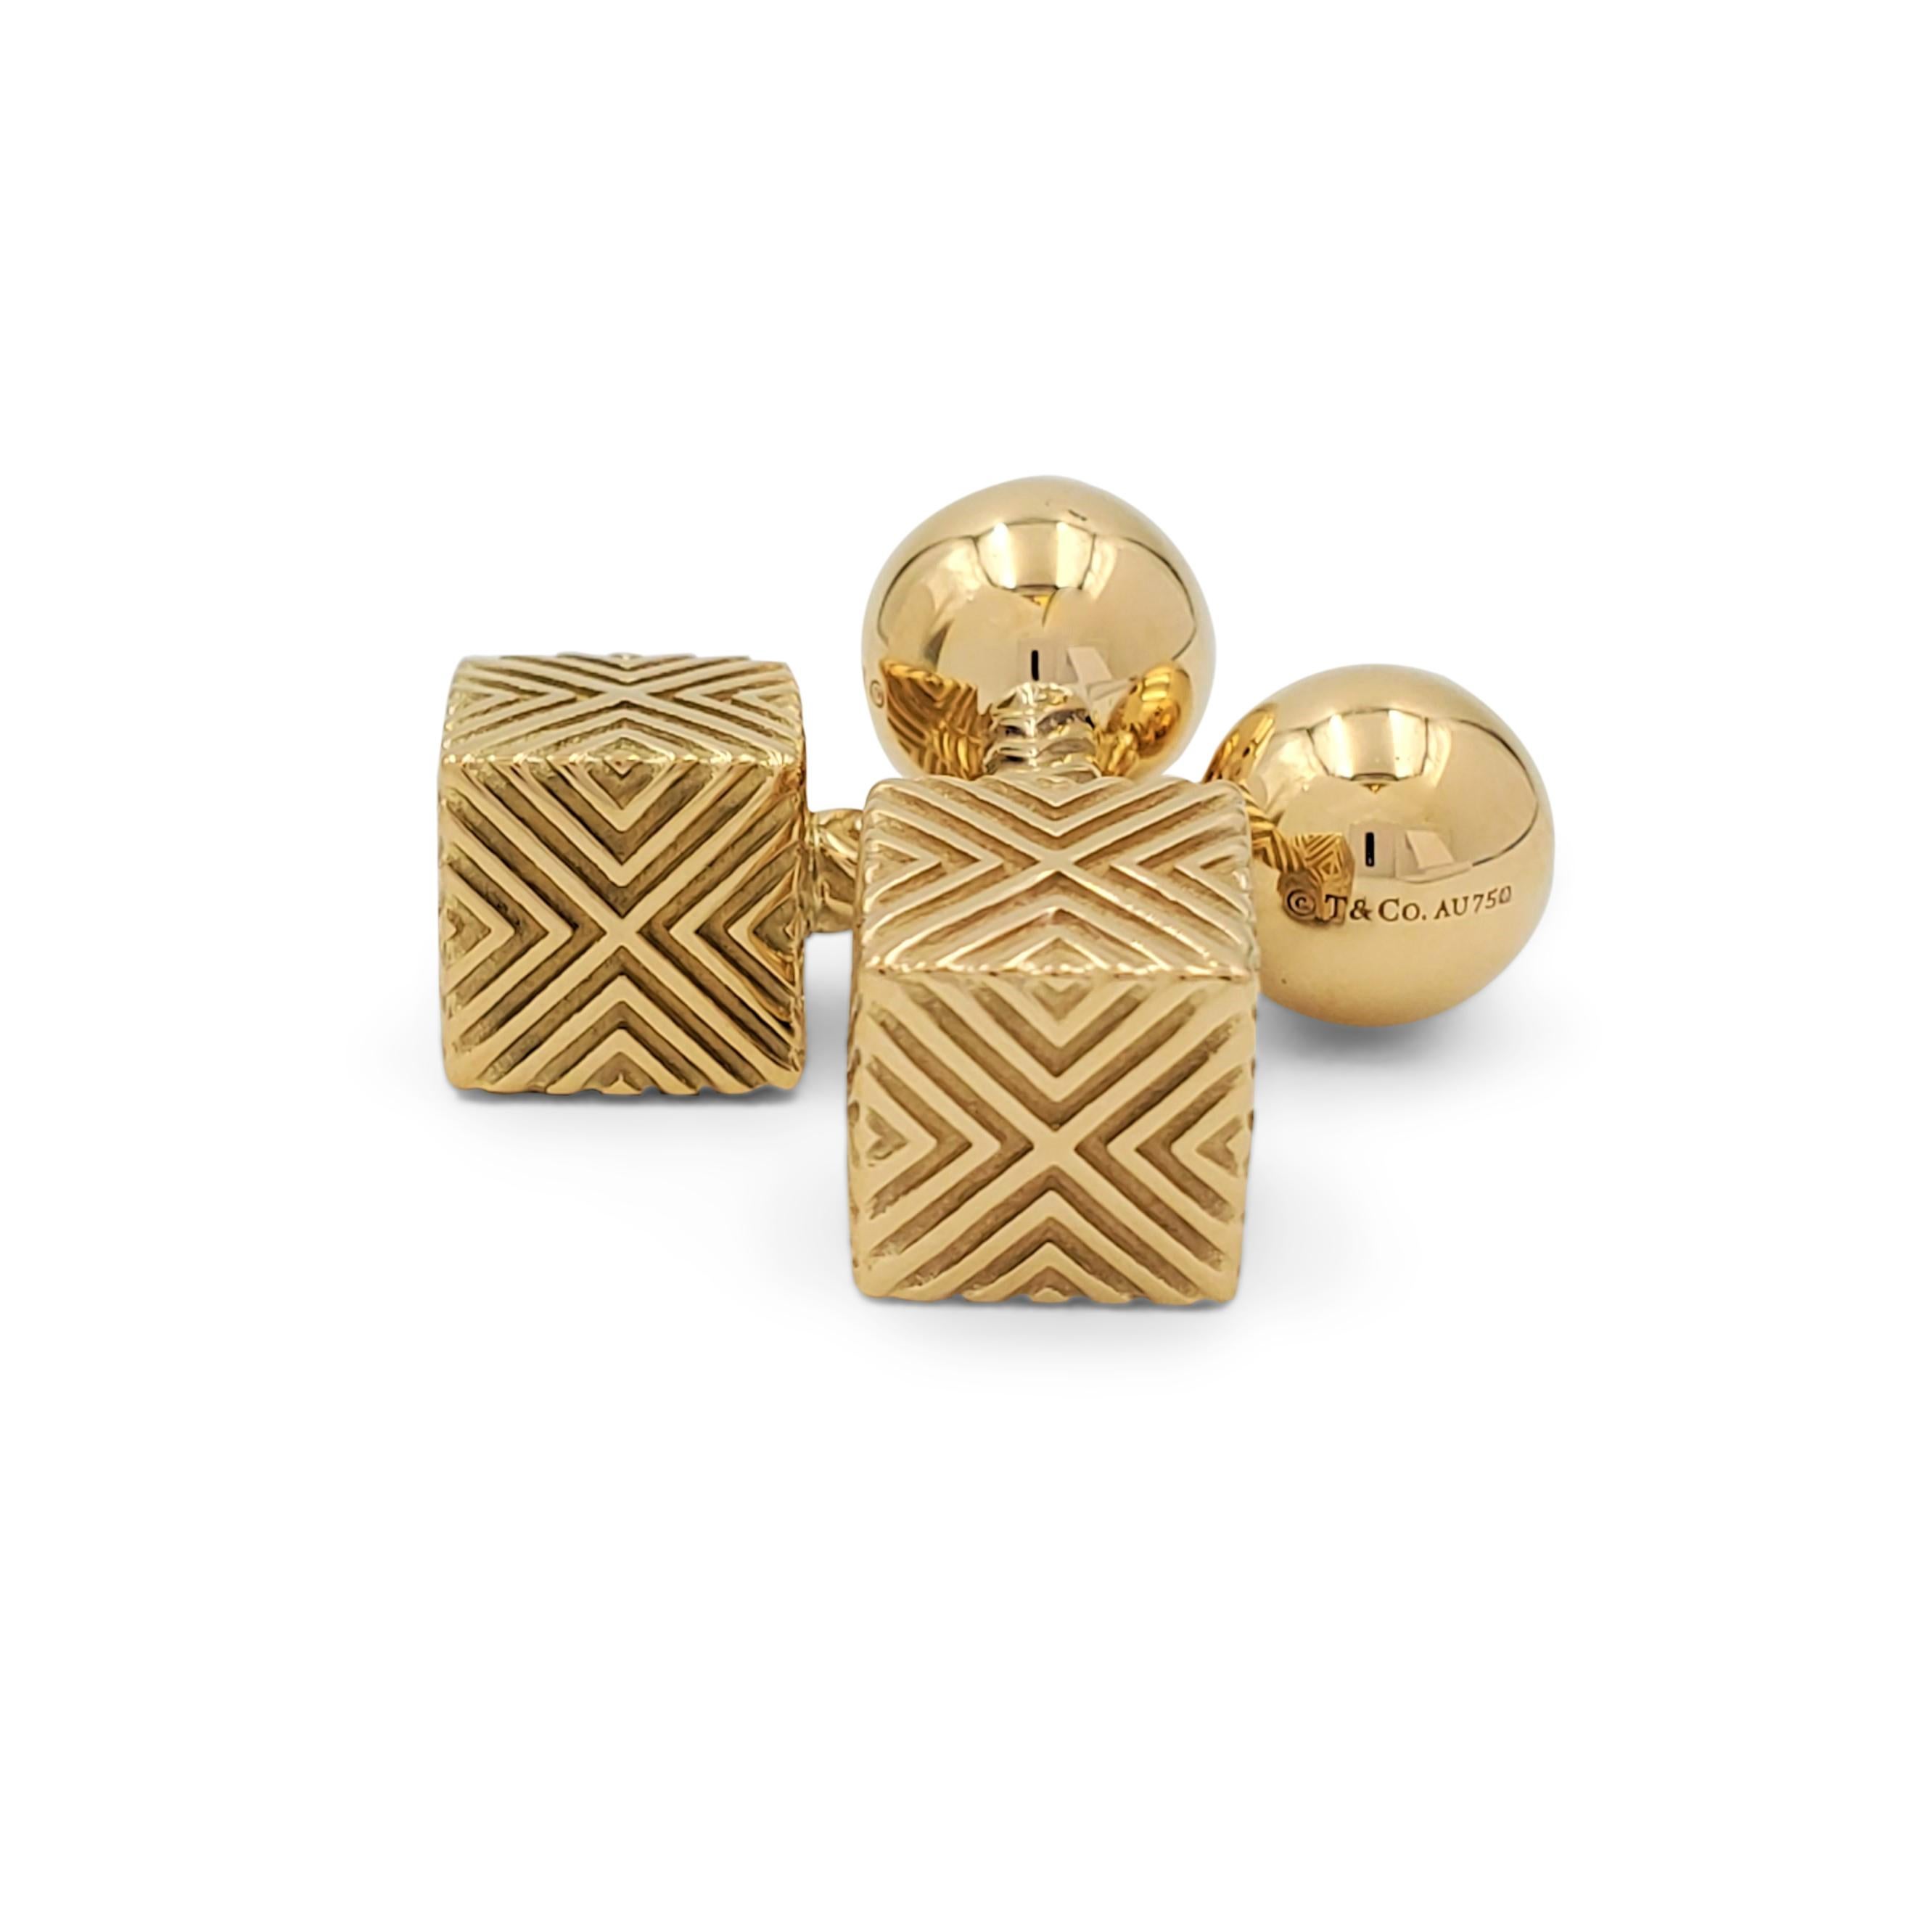 Authentic Tiffany & Co. cufflink pair crafted in 18 karat yellow gold. One end of the cufflink centers on a round high polished gold ball with the Tiffany & Co. signature and a 750 Au gold stamp. The other end of the cufflink is a gold cube with 'X'